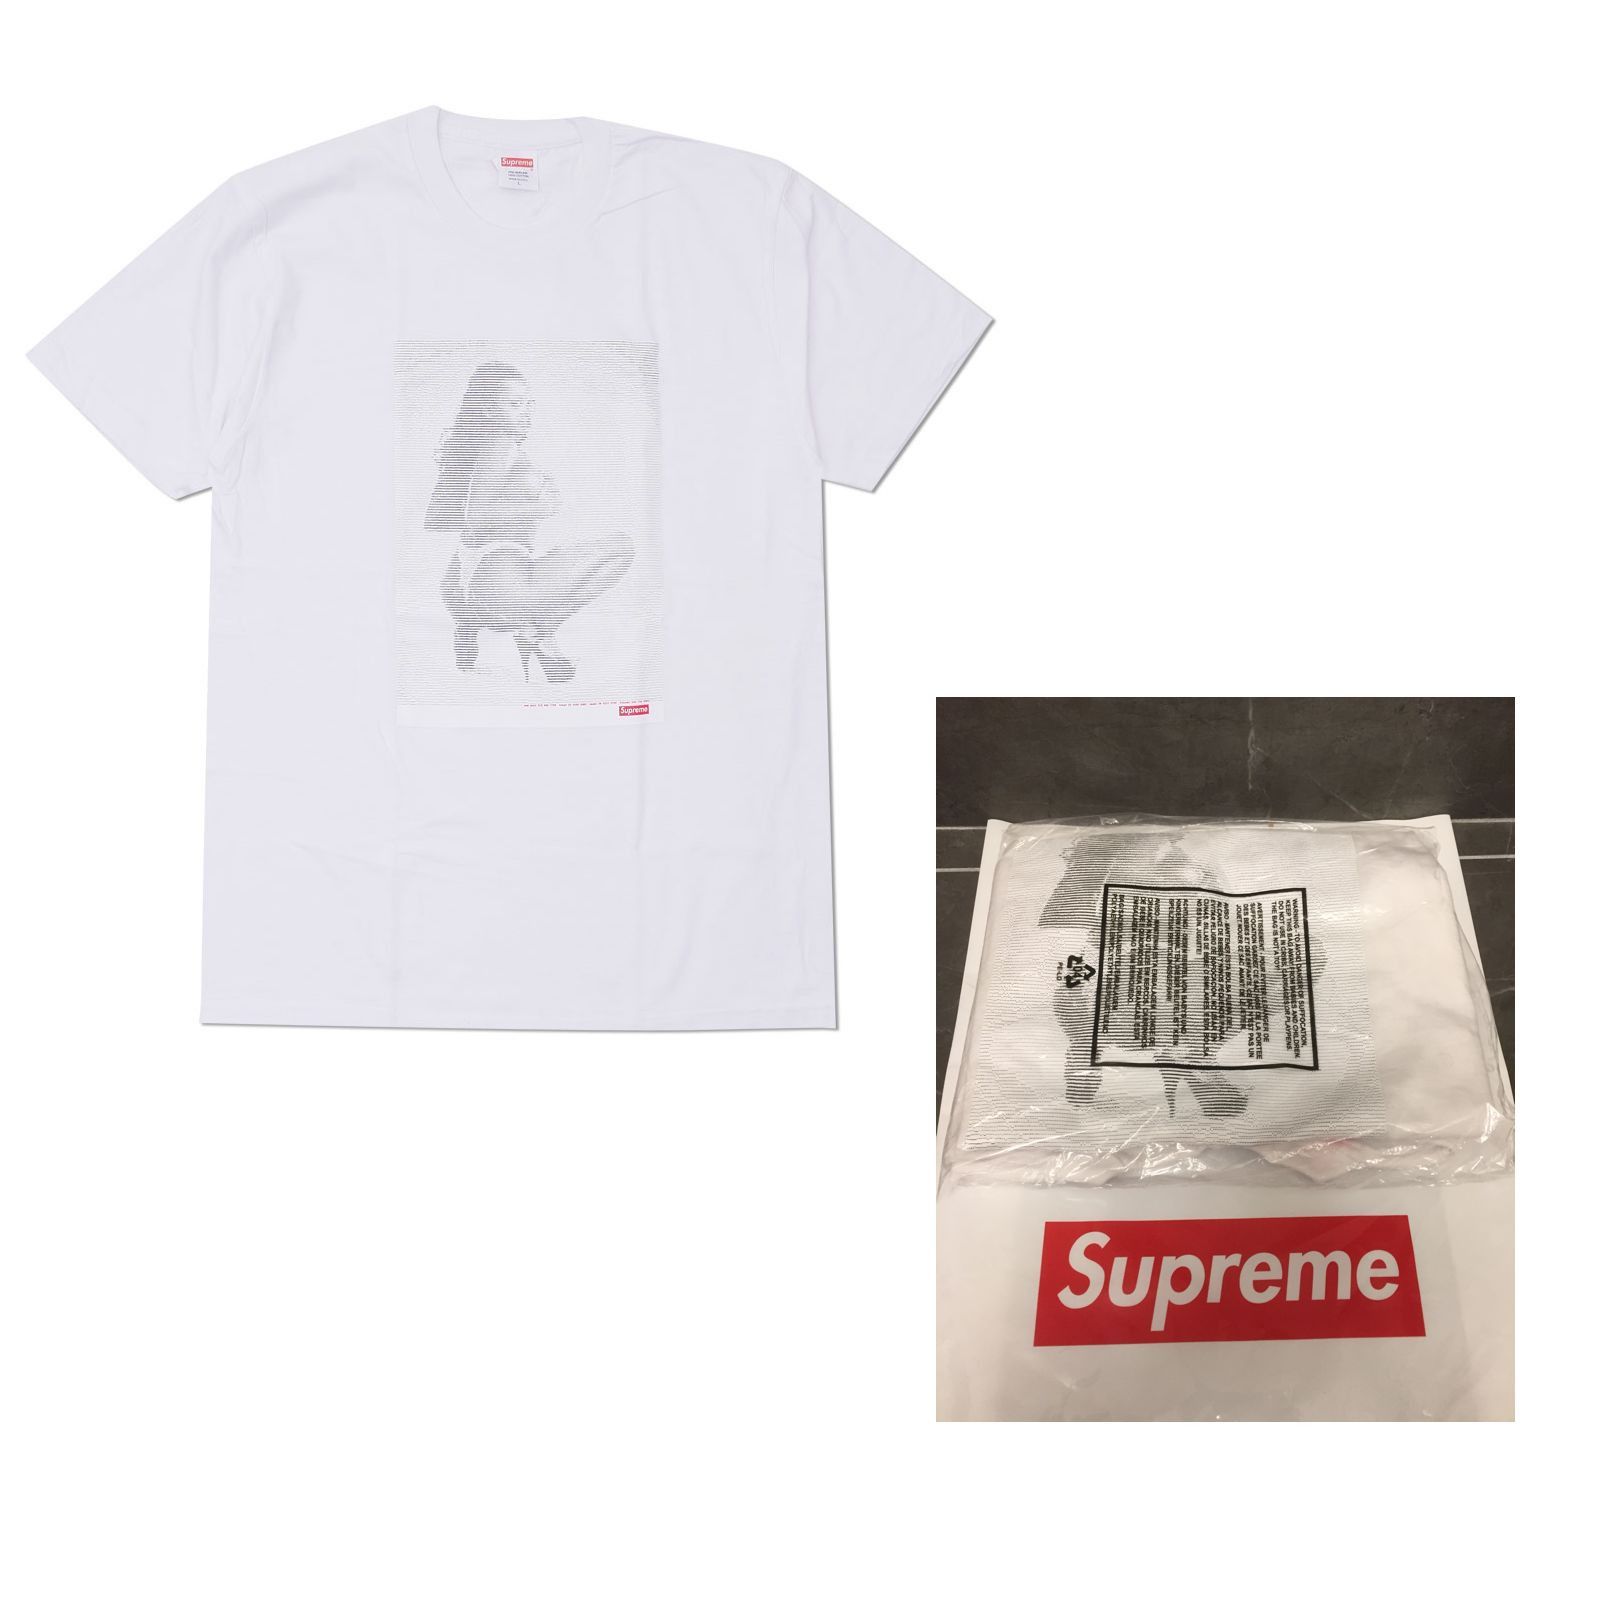 Supreme Supreme Digi Tee SS17 White Size Large T-Shirt BRAND NEW IN BAG W/  RECEIPT | Grailed